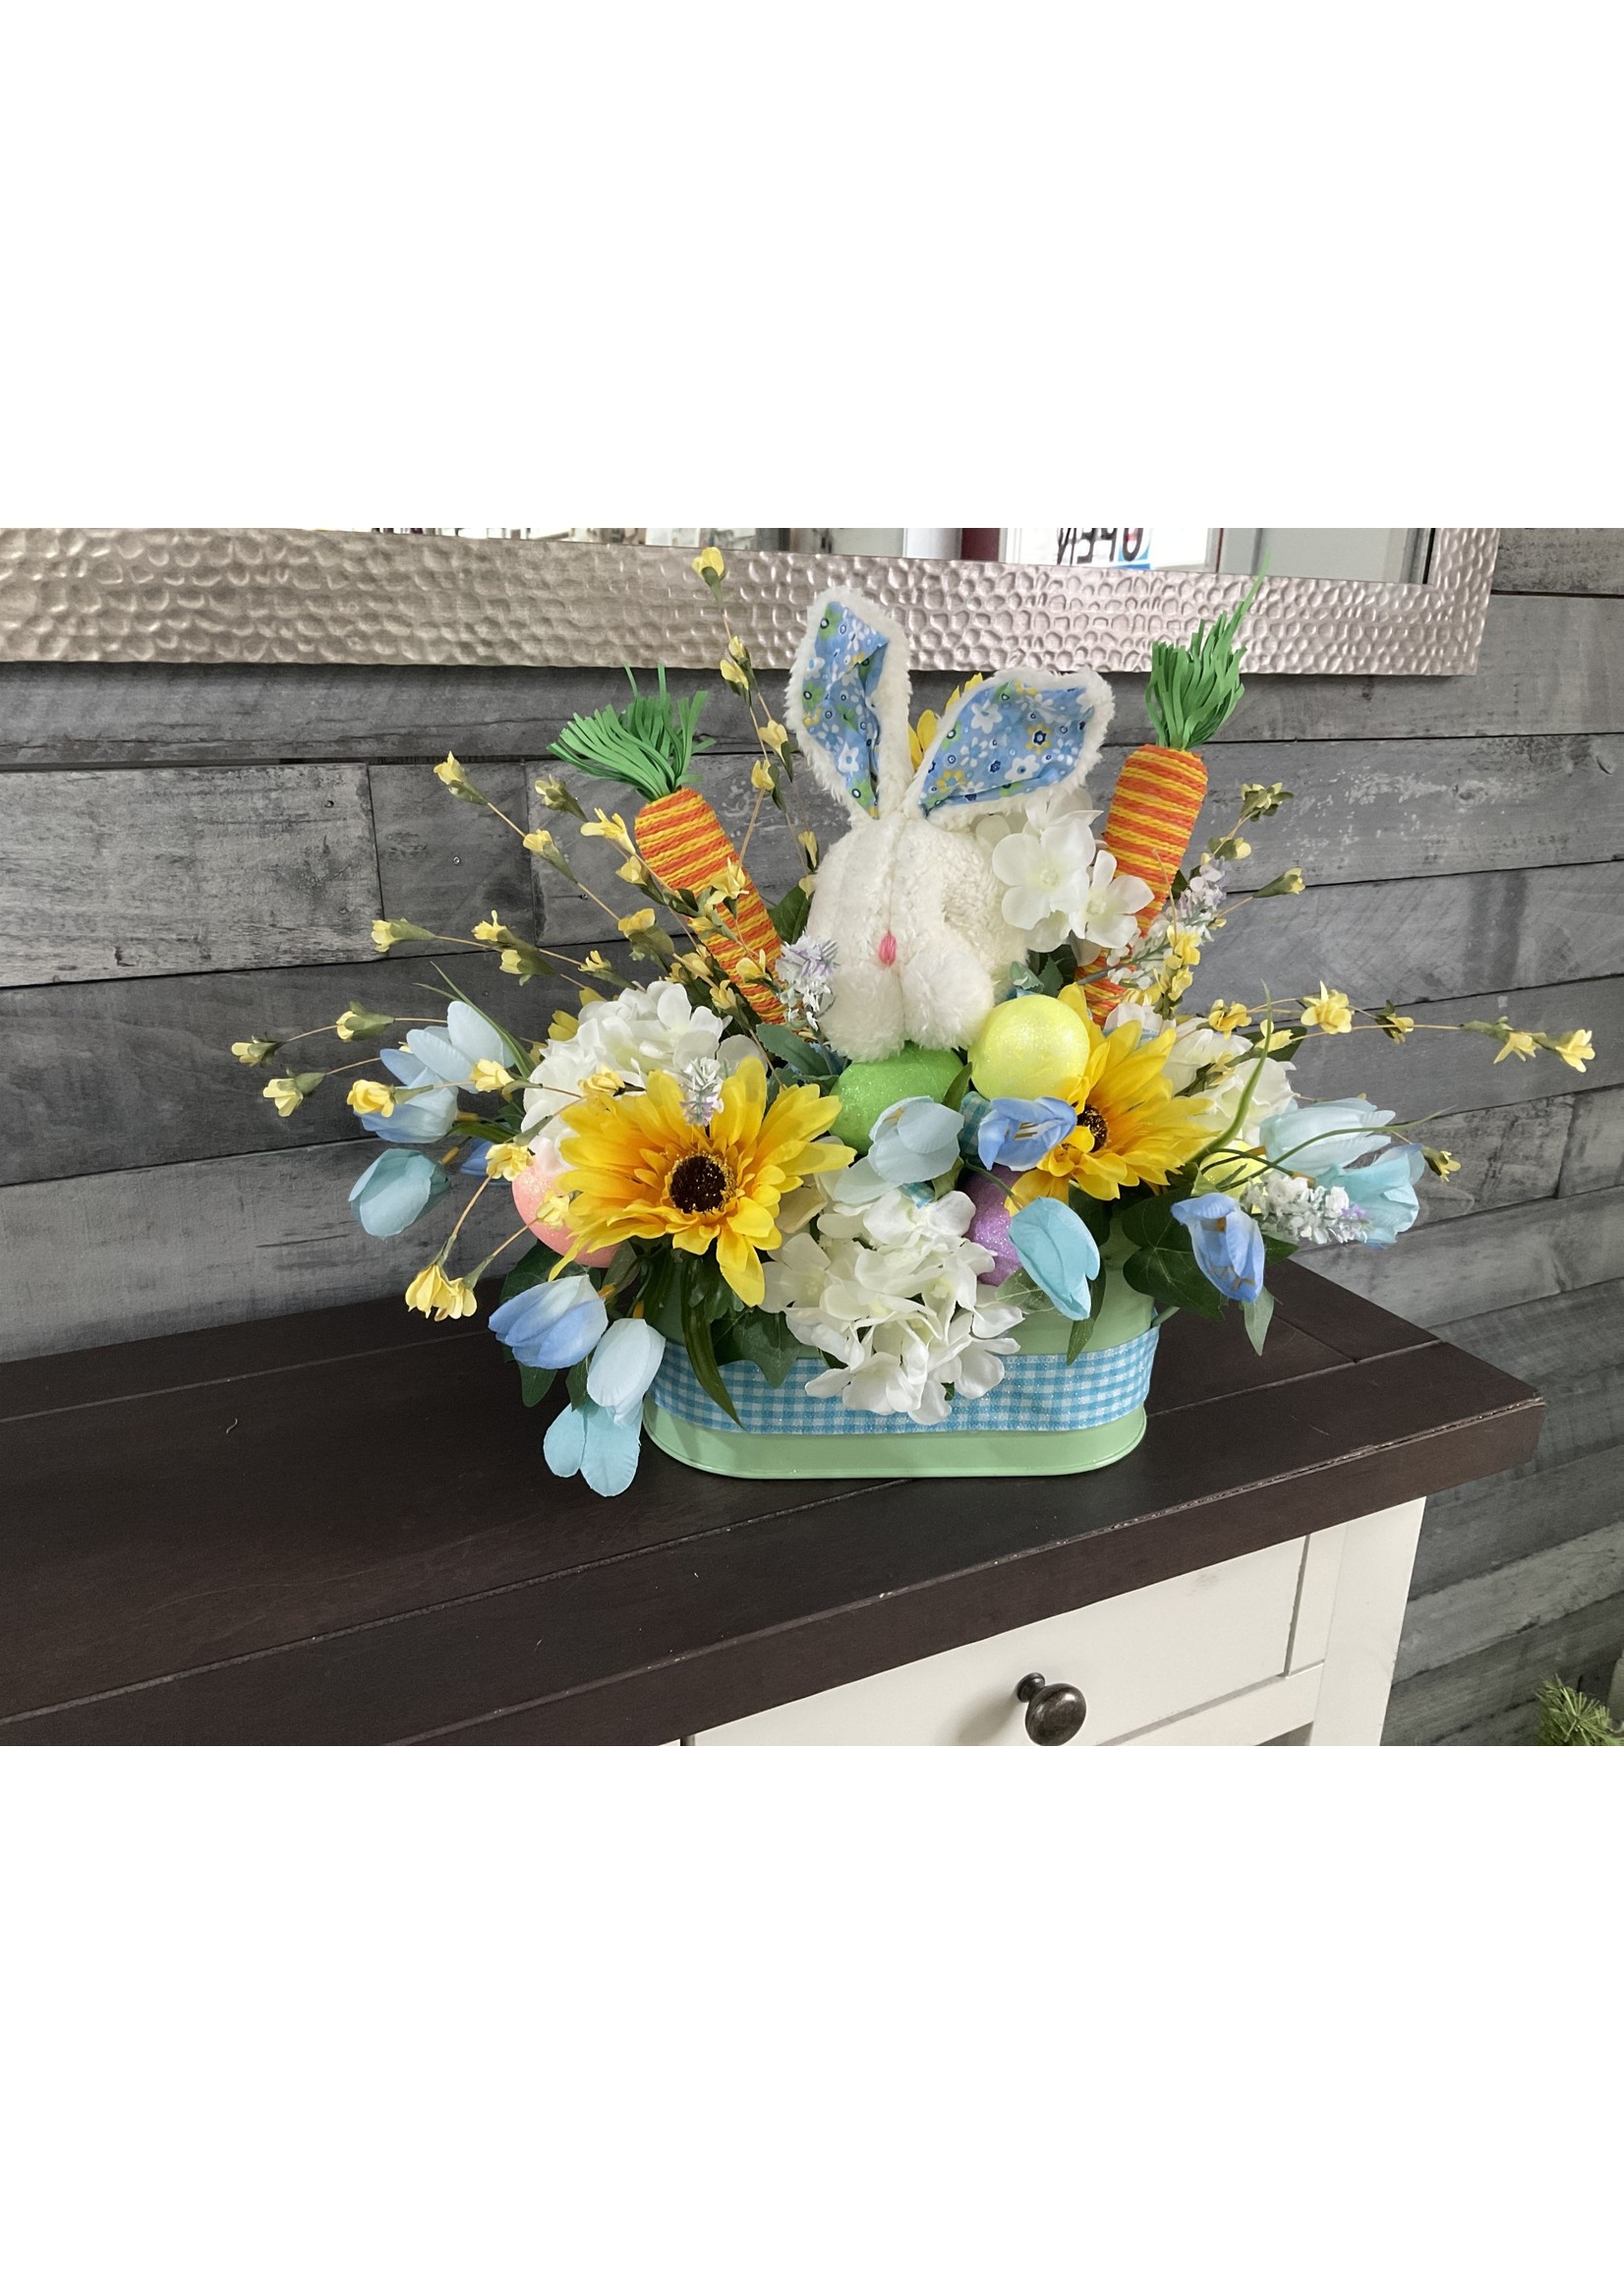 My New Favorite Thing Centerpiece Easter Green Container Bunny, Carrots, Tulips with Blue Check Ribbon